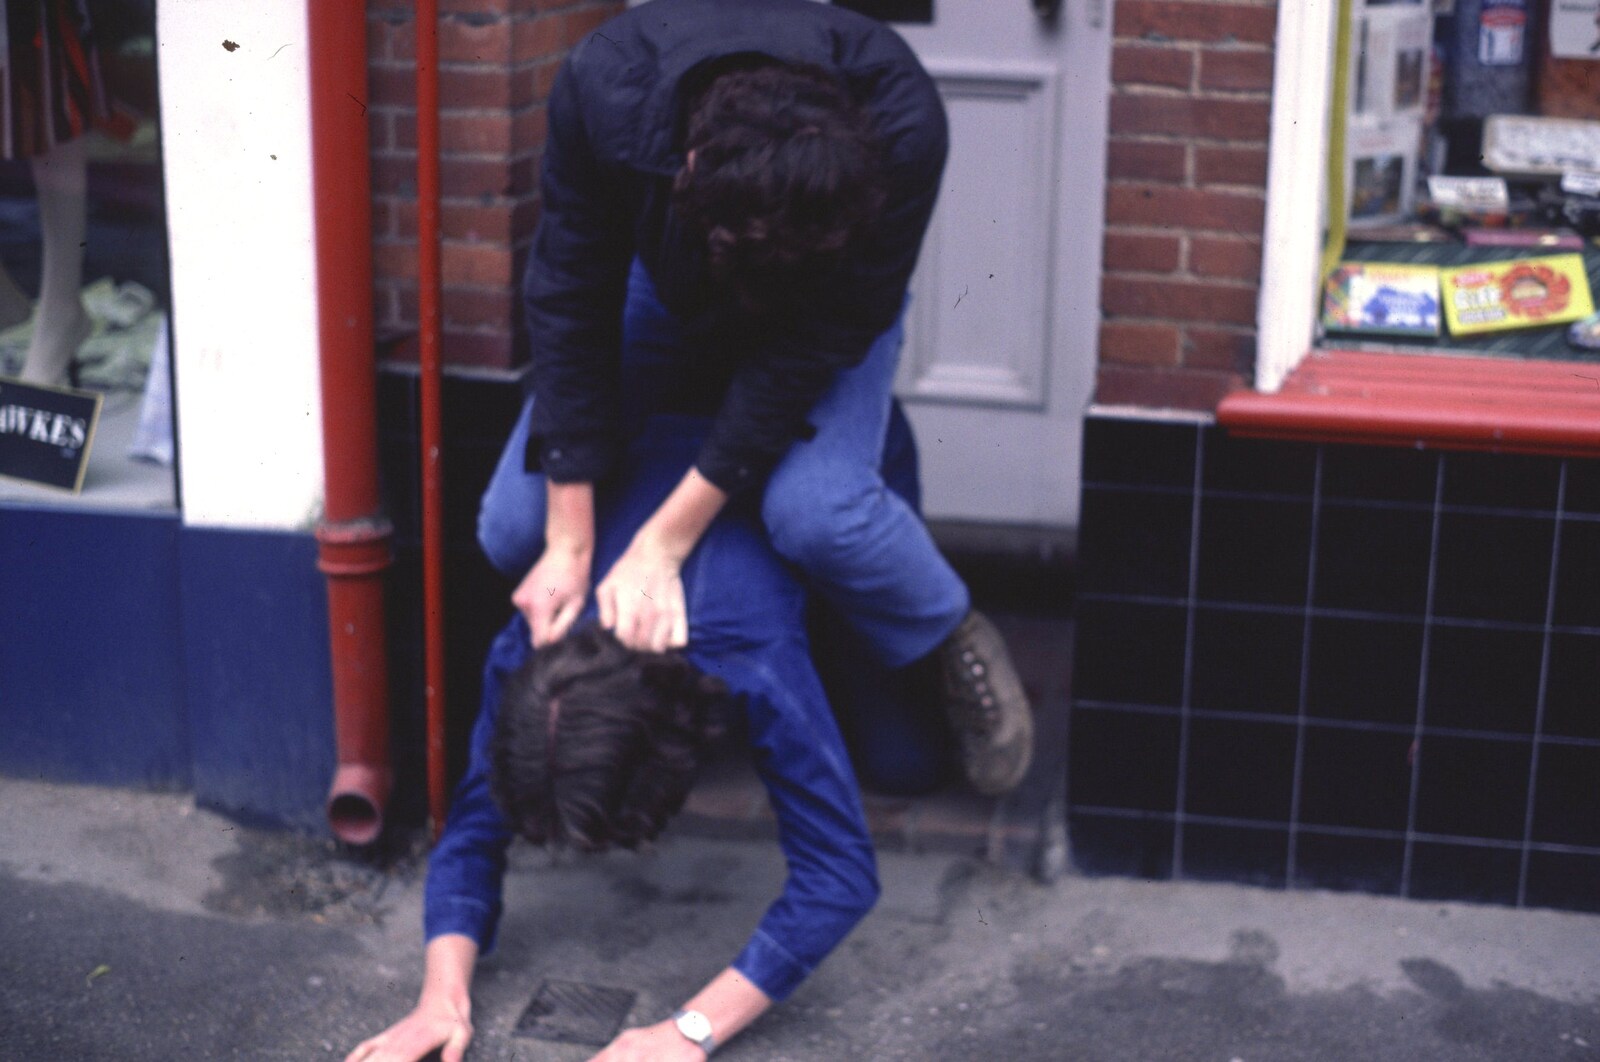 On a street somewhere, some sort of leap-frog occurs from Nosher's 18th pre-Birthday and College Miscellany, Sway and Brockenhurst - 22nd May 1985